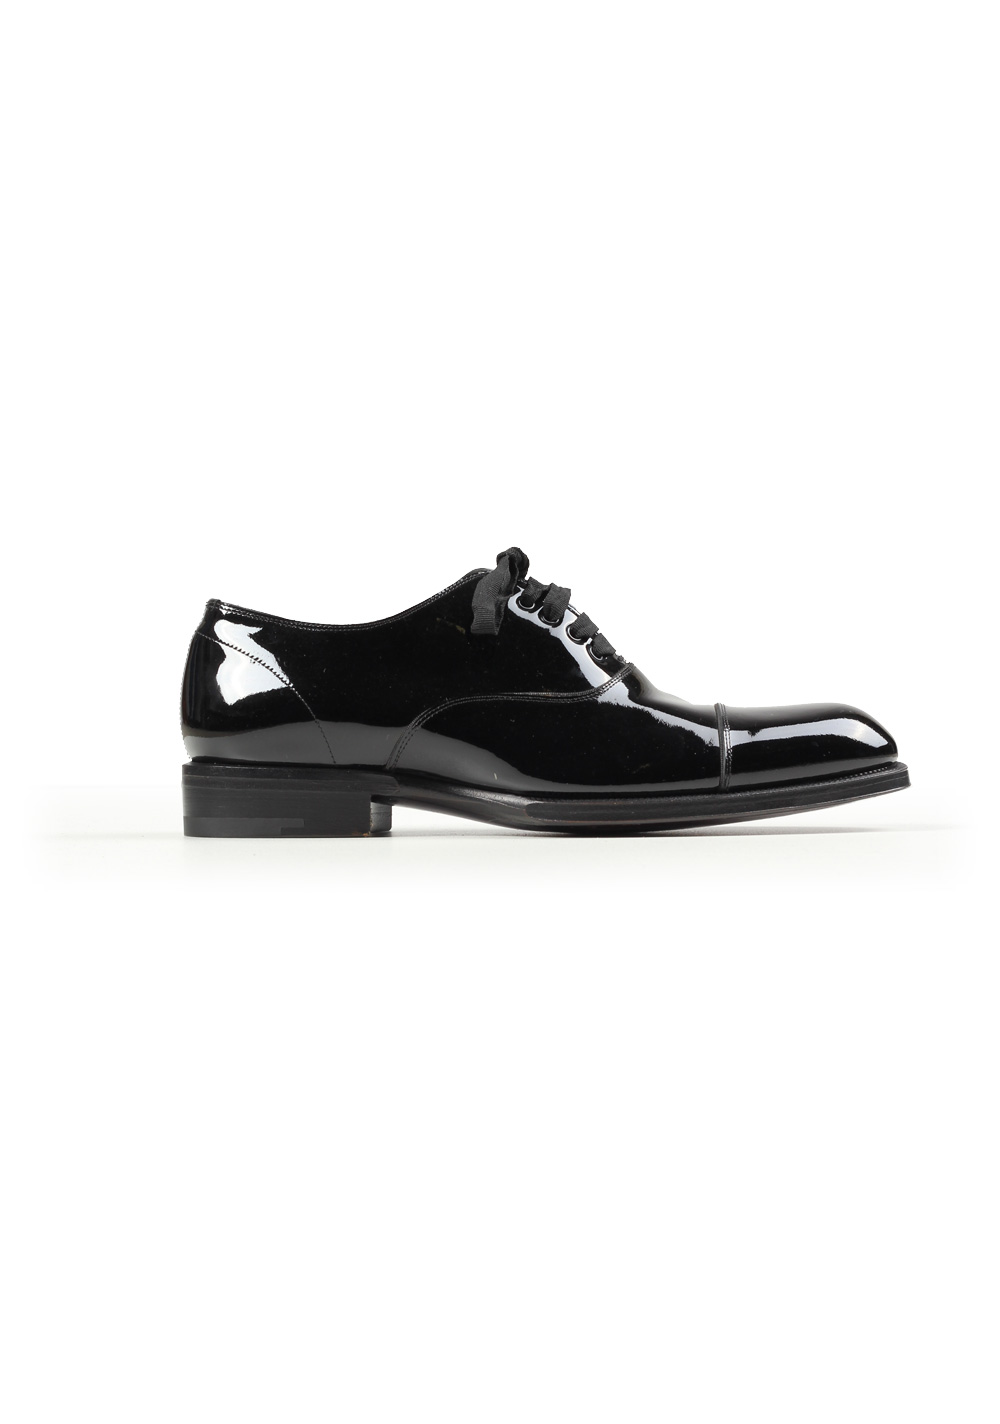 TOM FORD Gianni Evening Lace Up Tuxedo Dress Shoes Size 7T / 8T U.S ...